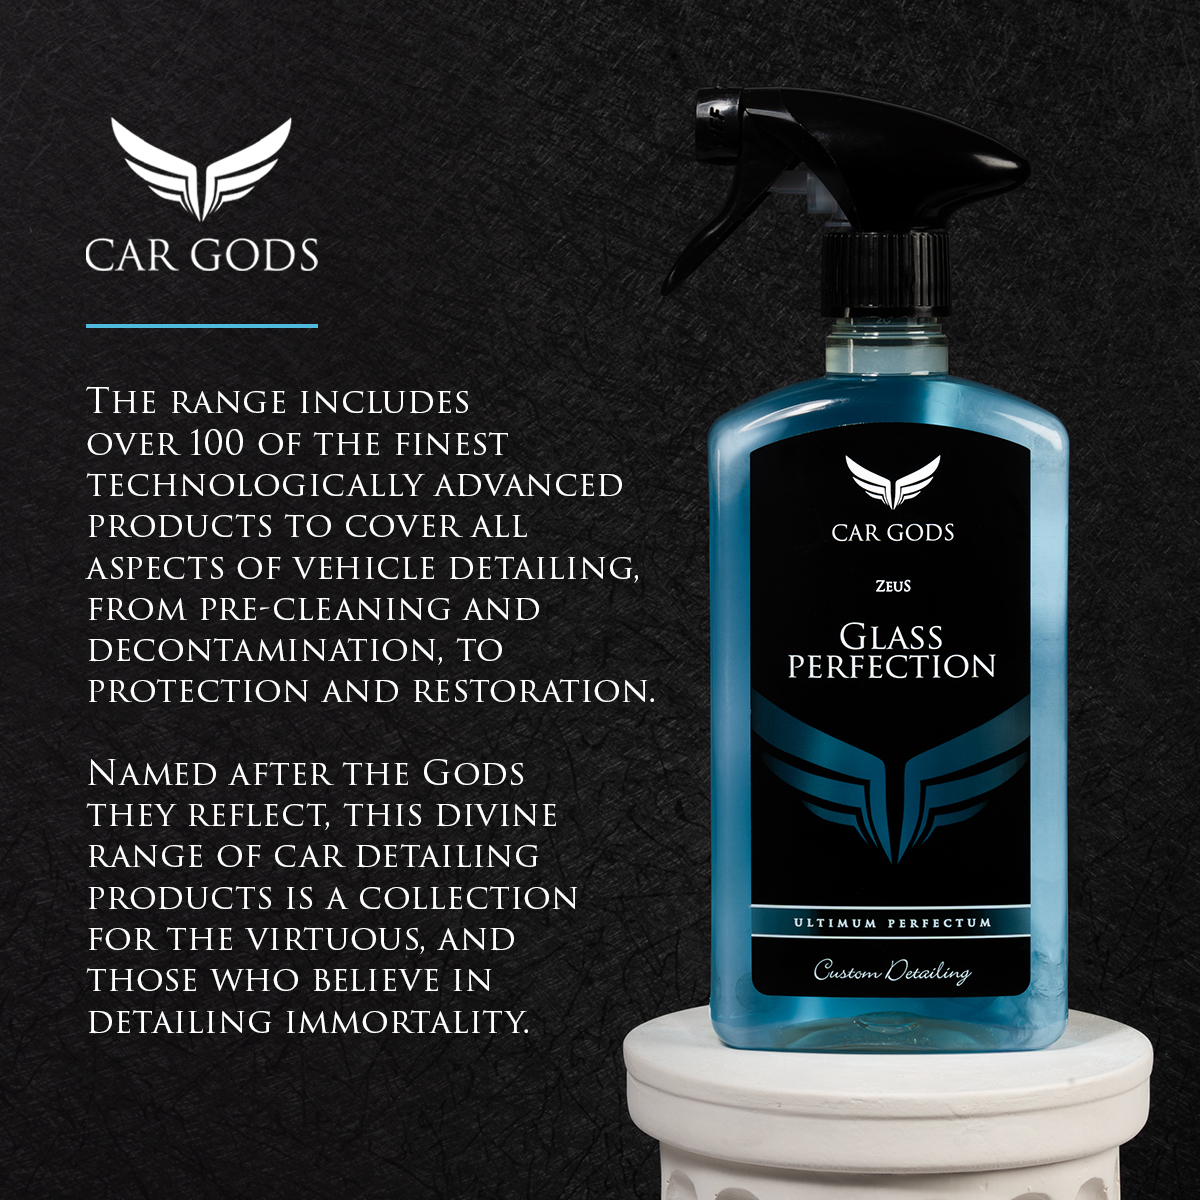 The range includes over 100 of the finest technologically advanced products to cover all aspects of vehicle detailing, from pre-cleaning and decontamination, to protection and restoration. Named after the Gods they reflect, this divine range of car detailing products is a collection for the virtuous, and those who believe in detailing immortality.